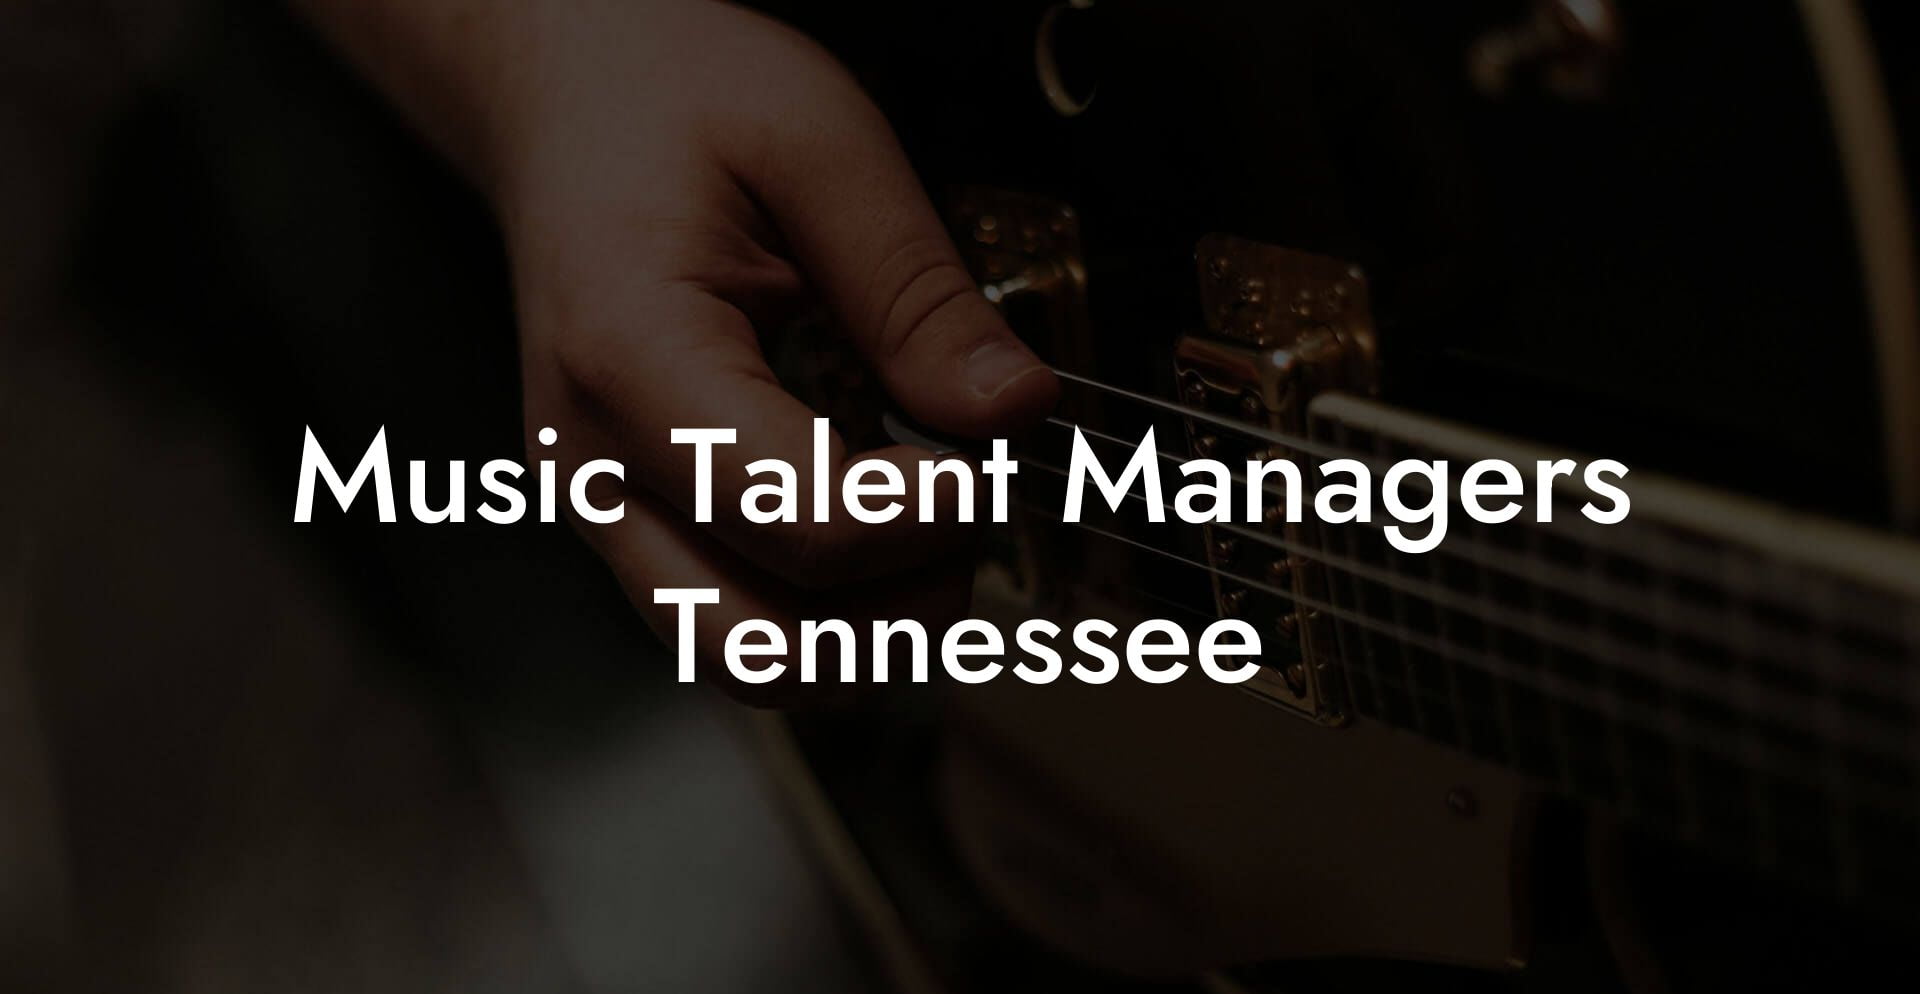 Music Talent Managers Tennessee